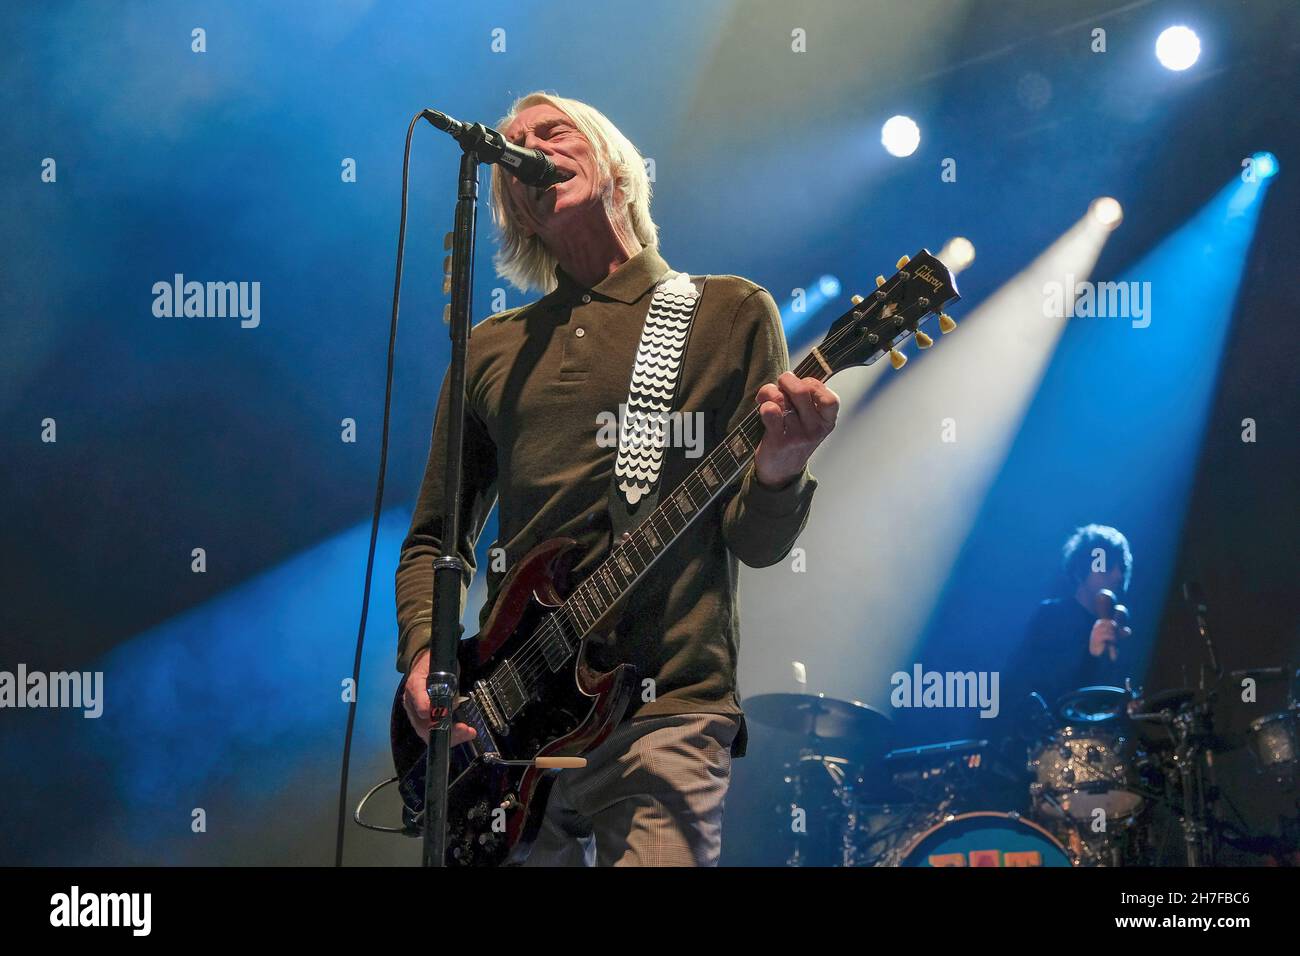 Paul Weller, born John William Weller, English singer-songwriter and musician, former member of new wave mod revival band The Jam, performs live on stage at the O2 Guildhall Southampton. (Photo by Dawn Fletcher-Park / SOPA Images/Sipa USA) Stock Photo